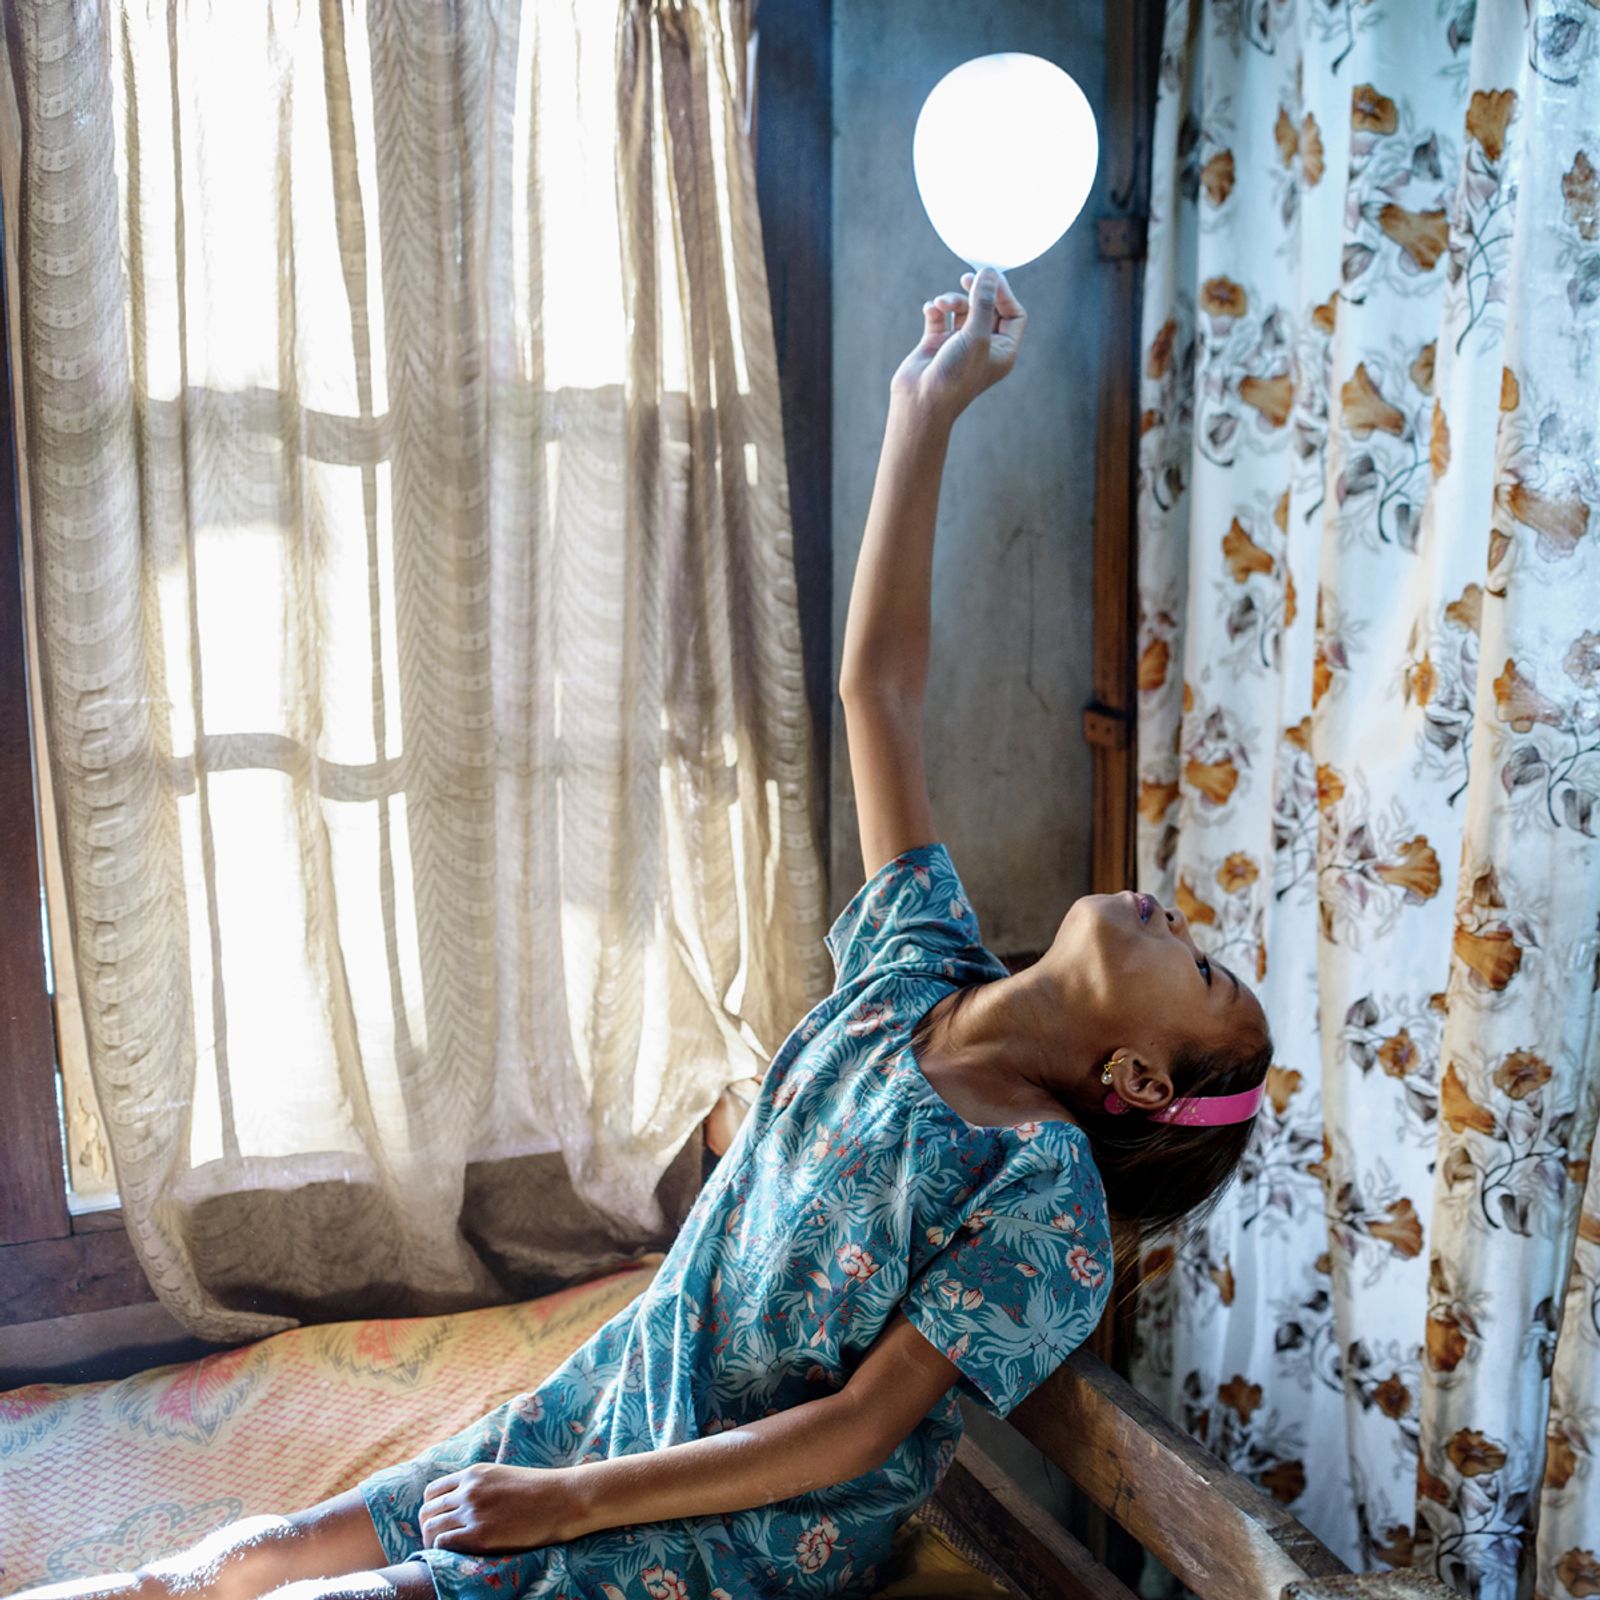 © Karolin Klüppel - Phida, 9 years old, is playing with a balloon in her bedroom. She is the oldest of three siblings.